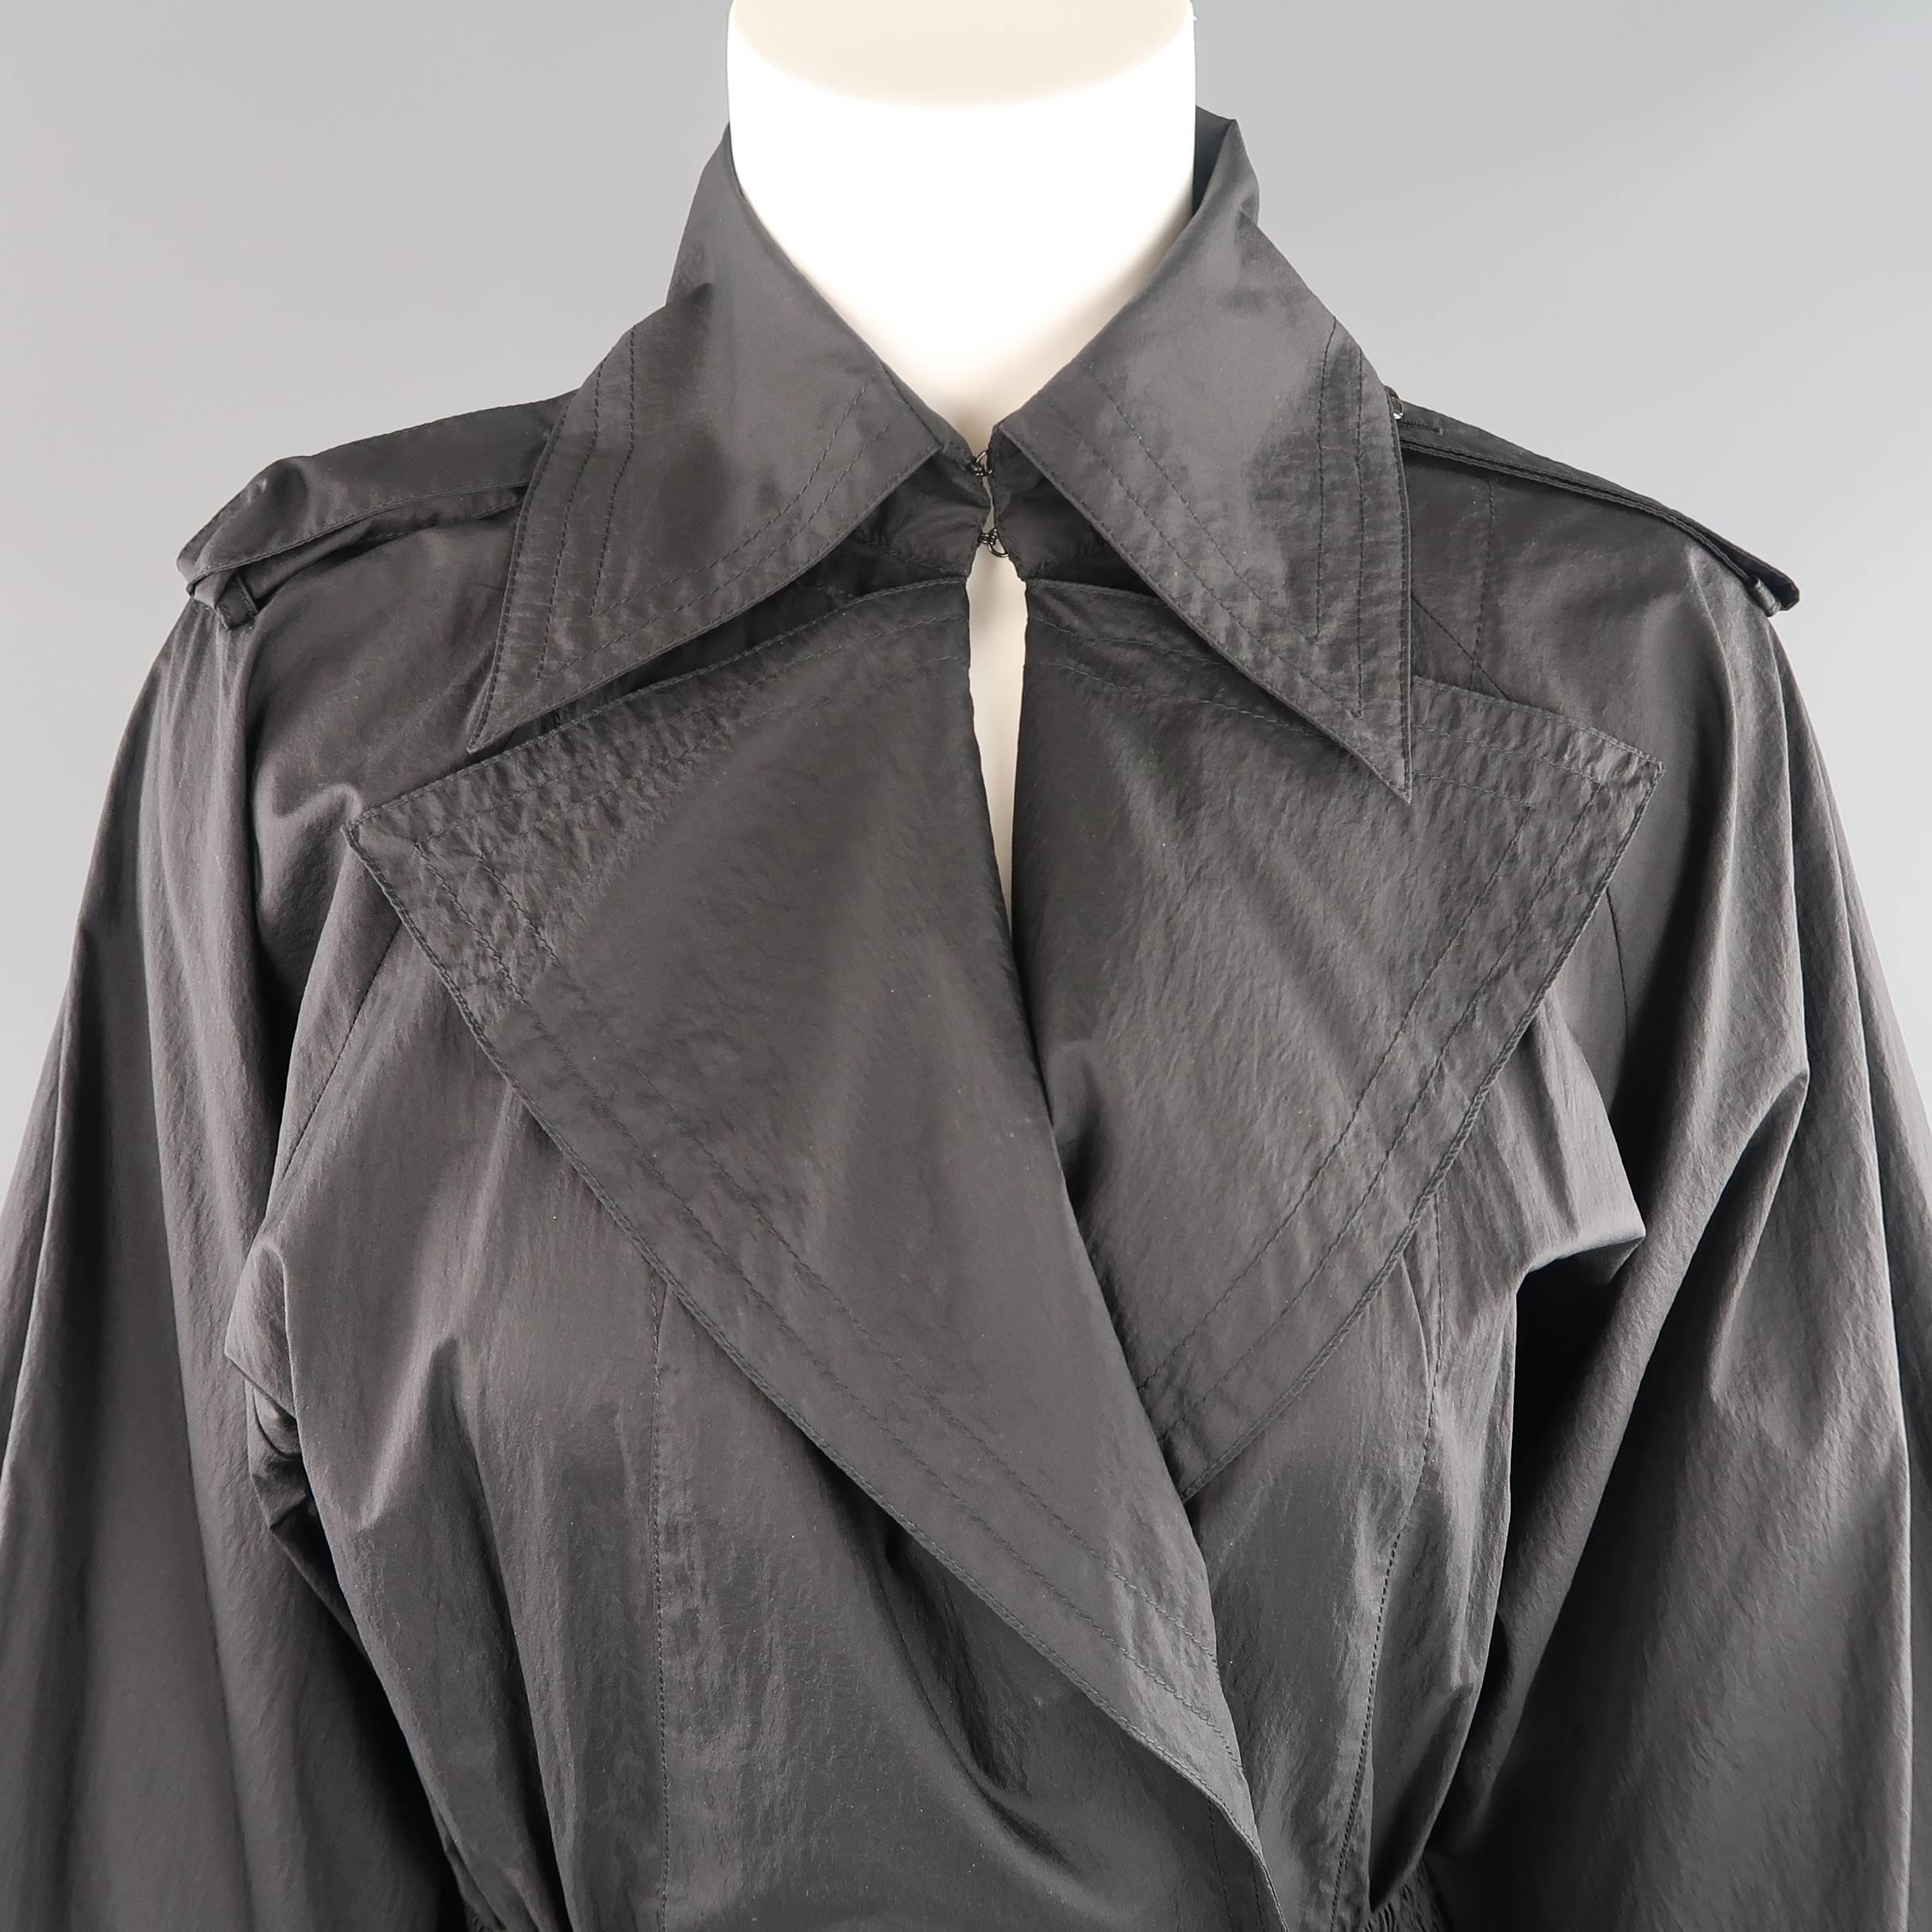 This fabulous CHANEL jacket comes in a light weight nylon windbreaker material and features a pointed collar with hook eye closures, pointed lapel, double breasted front with enamel flower buttons, epaulets, raglan balloon sleeves,  cinched, elastic